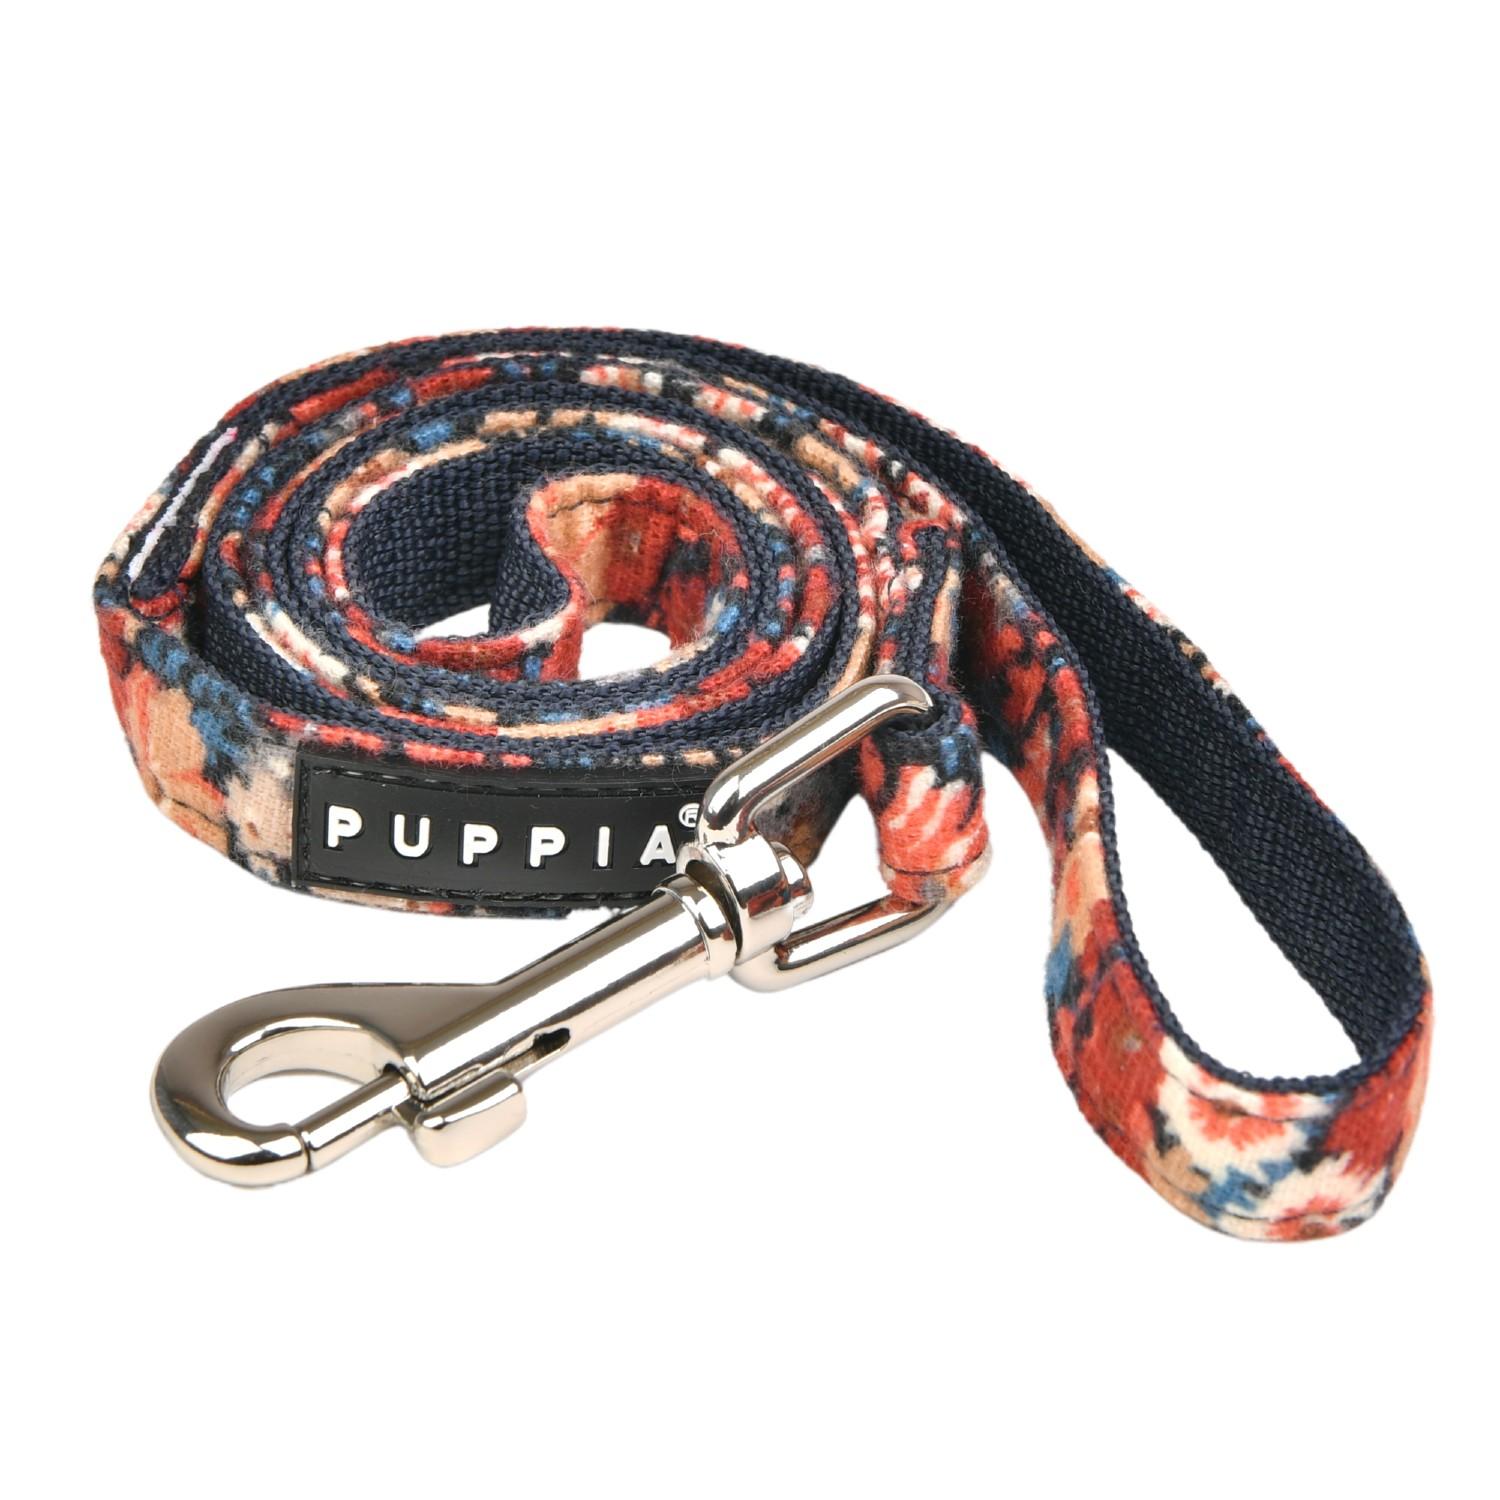 Gianni Dog Leash by Puppia - Navy